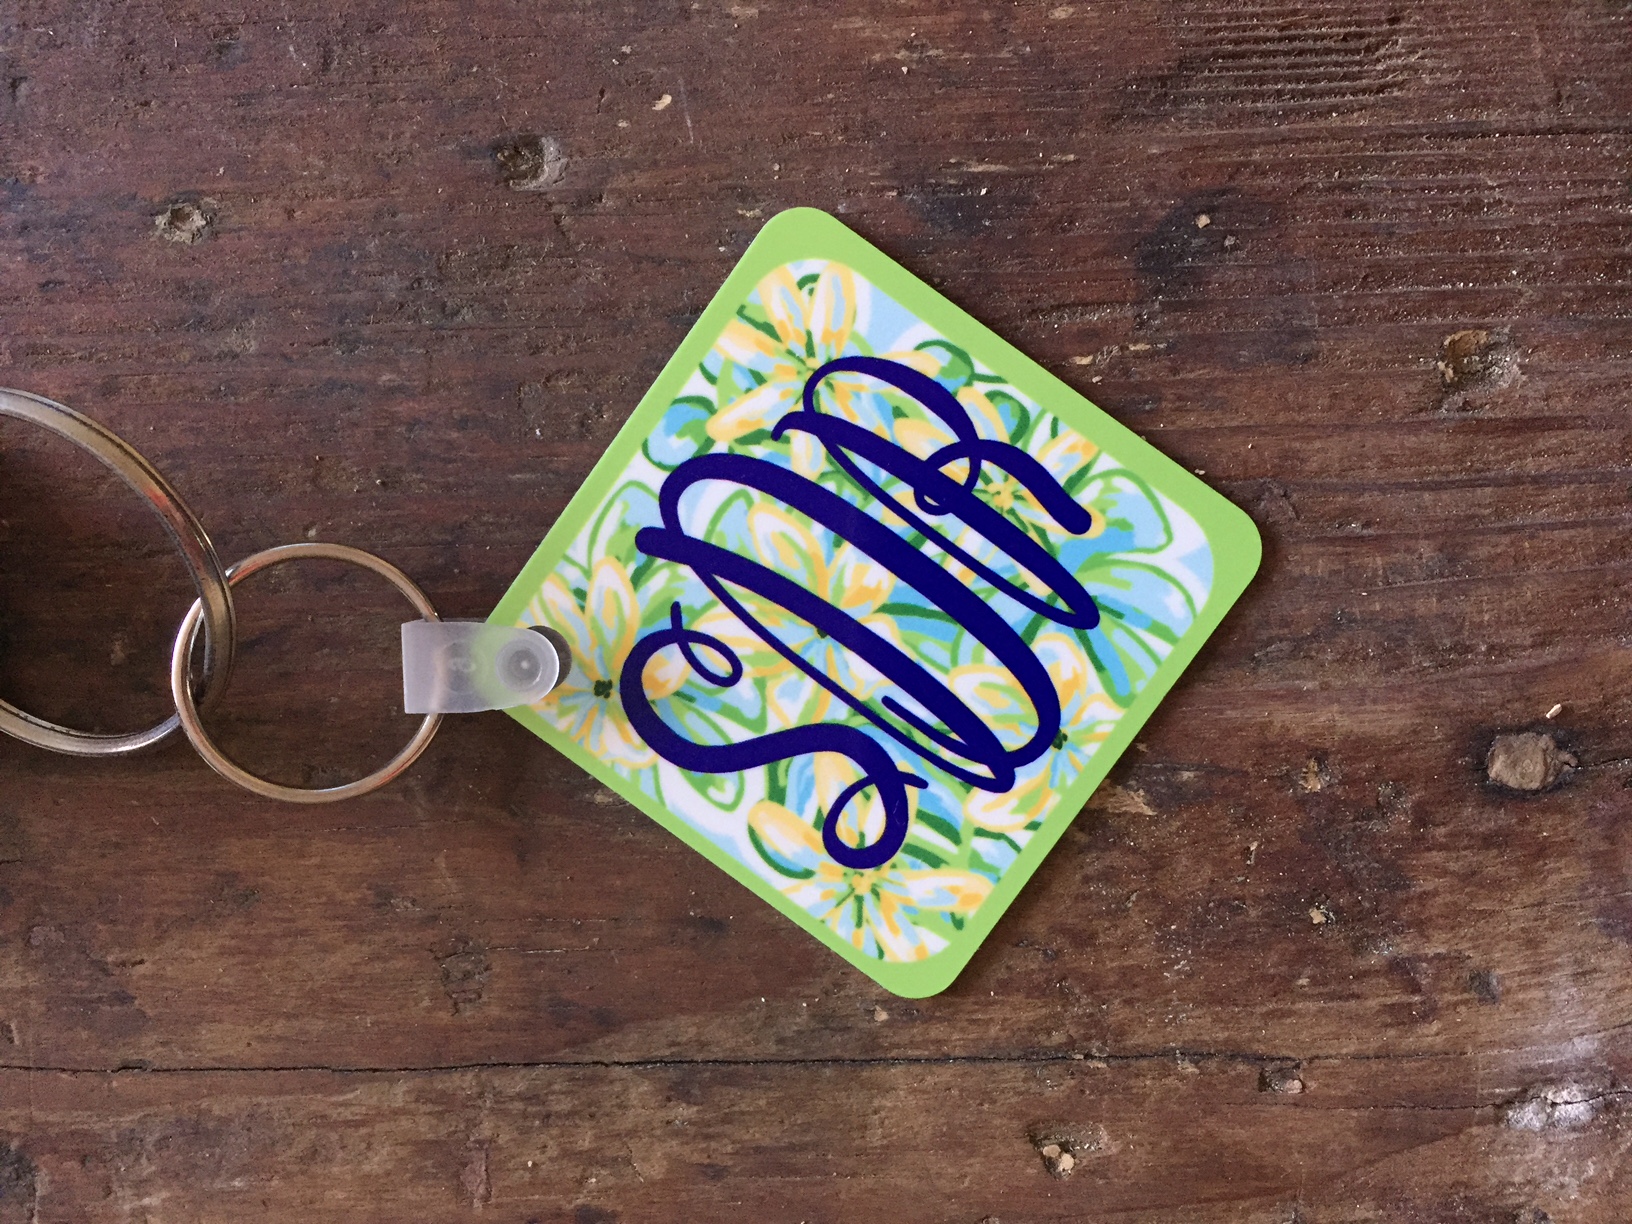 Monogram Keychain made with sublimation printing